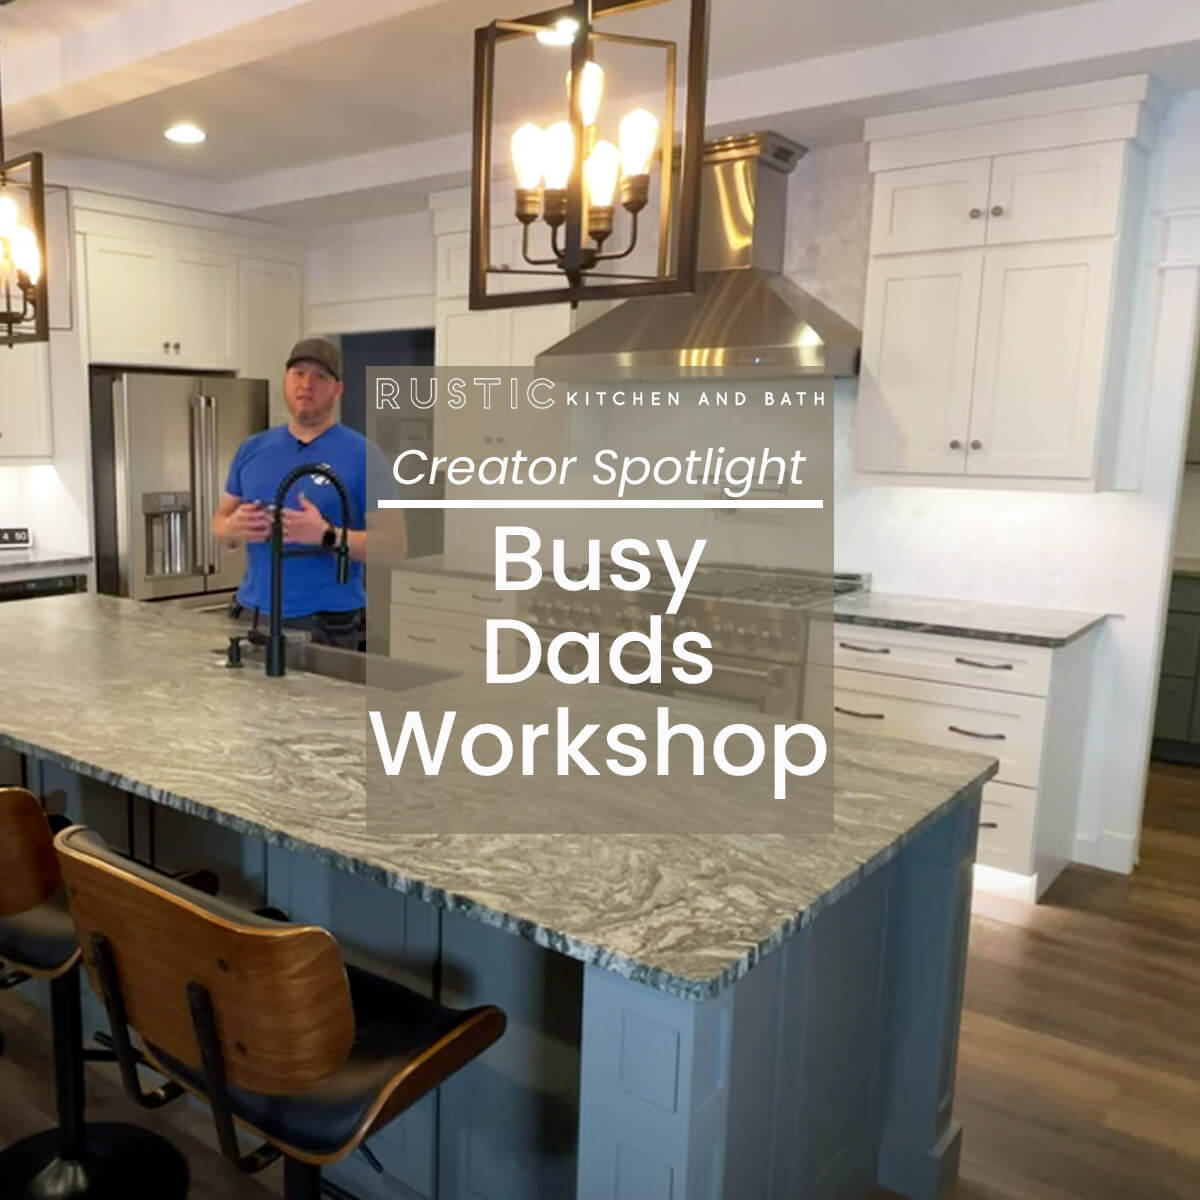 Busy Dads Workshop - Rustic Kitchen and Bath Creator Spotlight